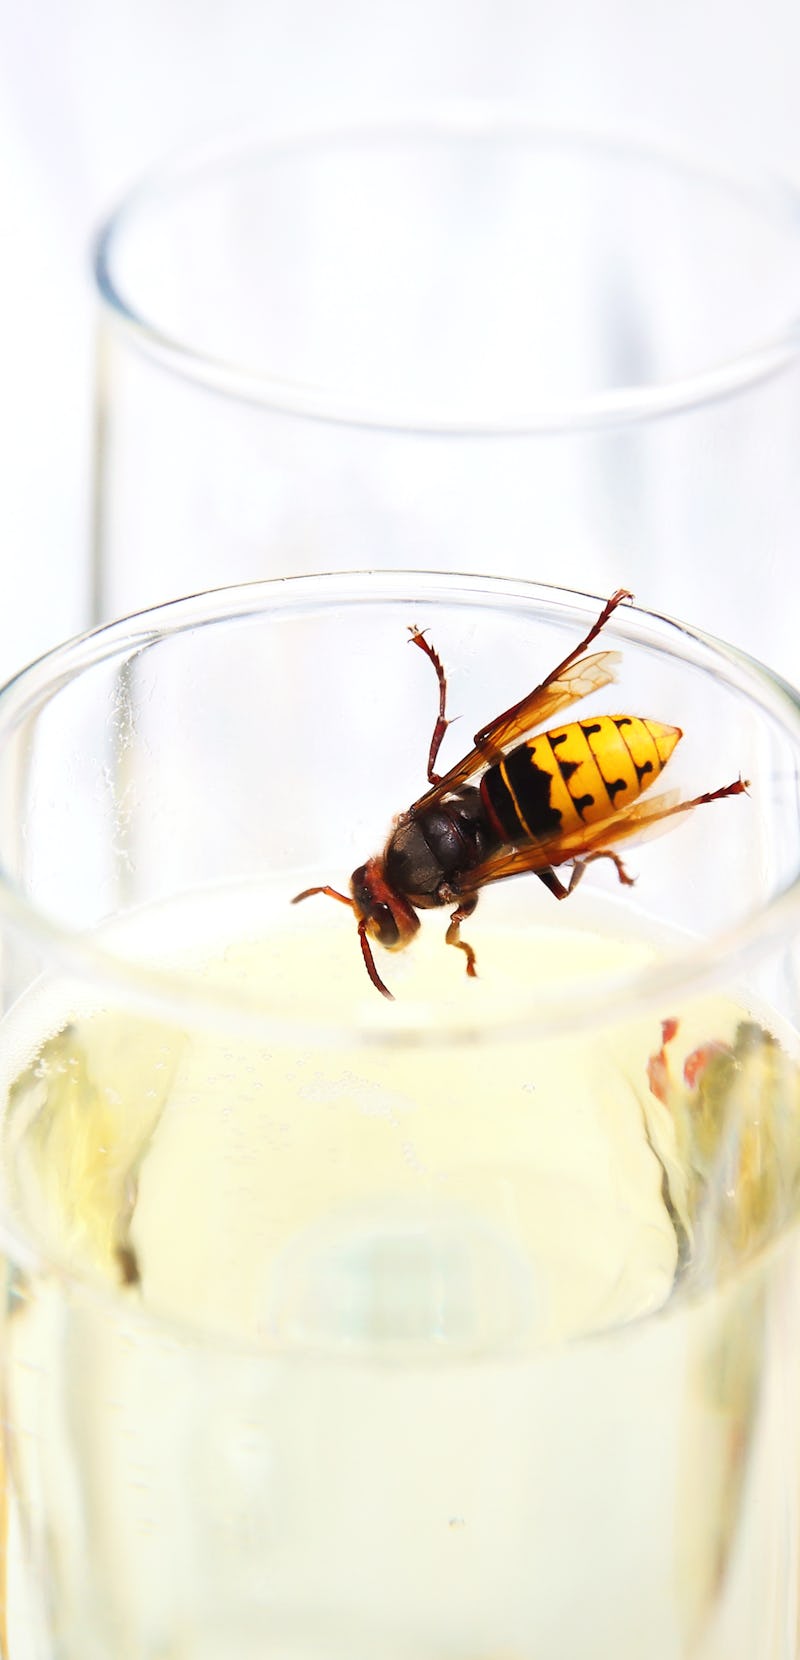 A wasp in a glass of champagne. Drinking animal